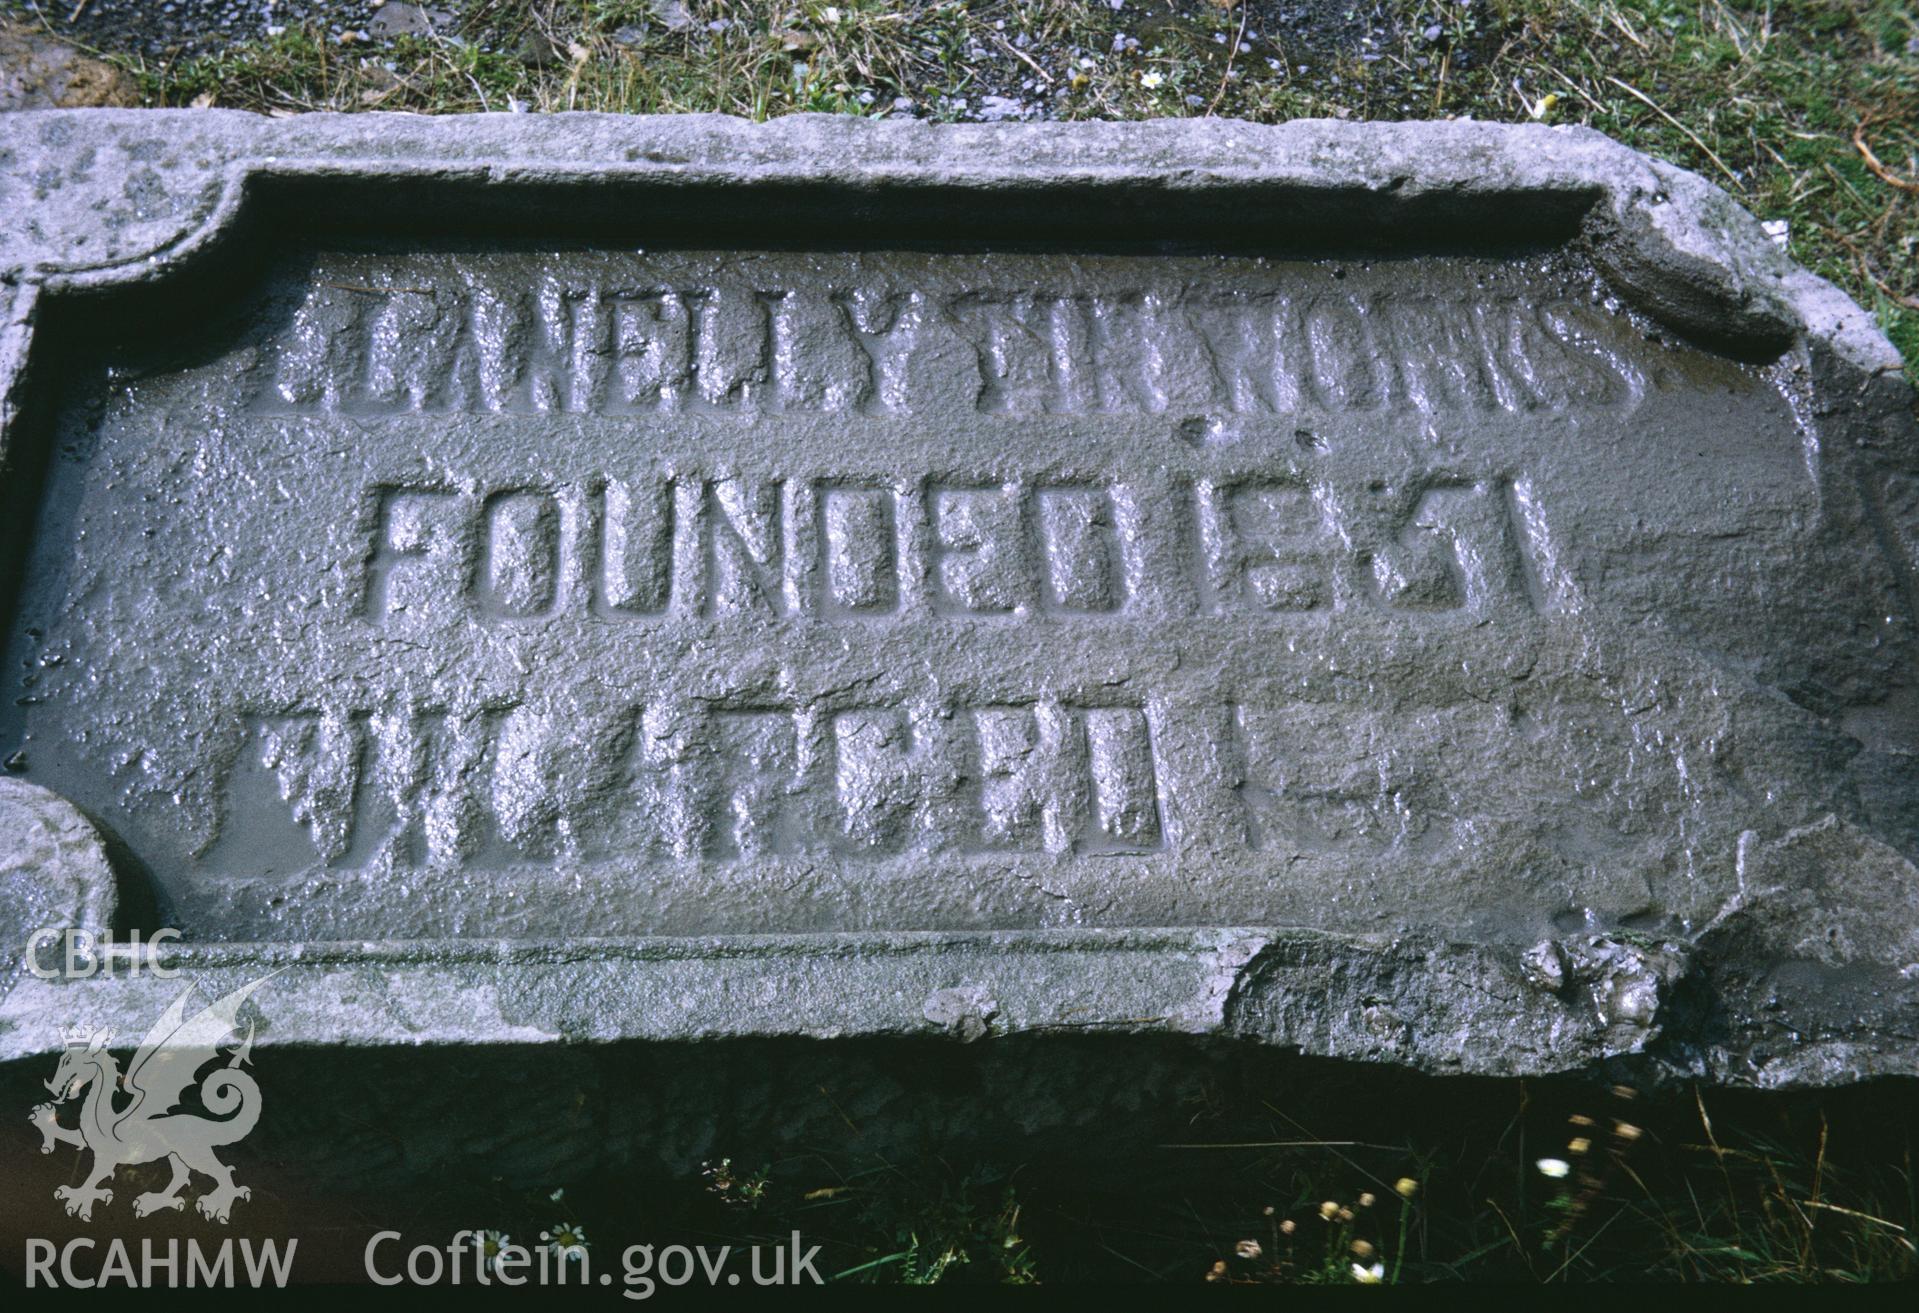 35mm colour slide of 1851 datestone at Morfa Tinplate Works, Llanelli, Carmarthenshire, by Dylan Roberts.